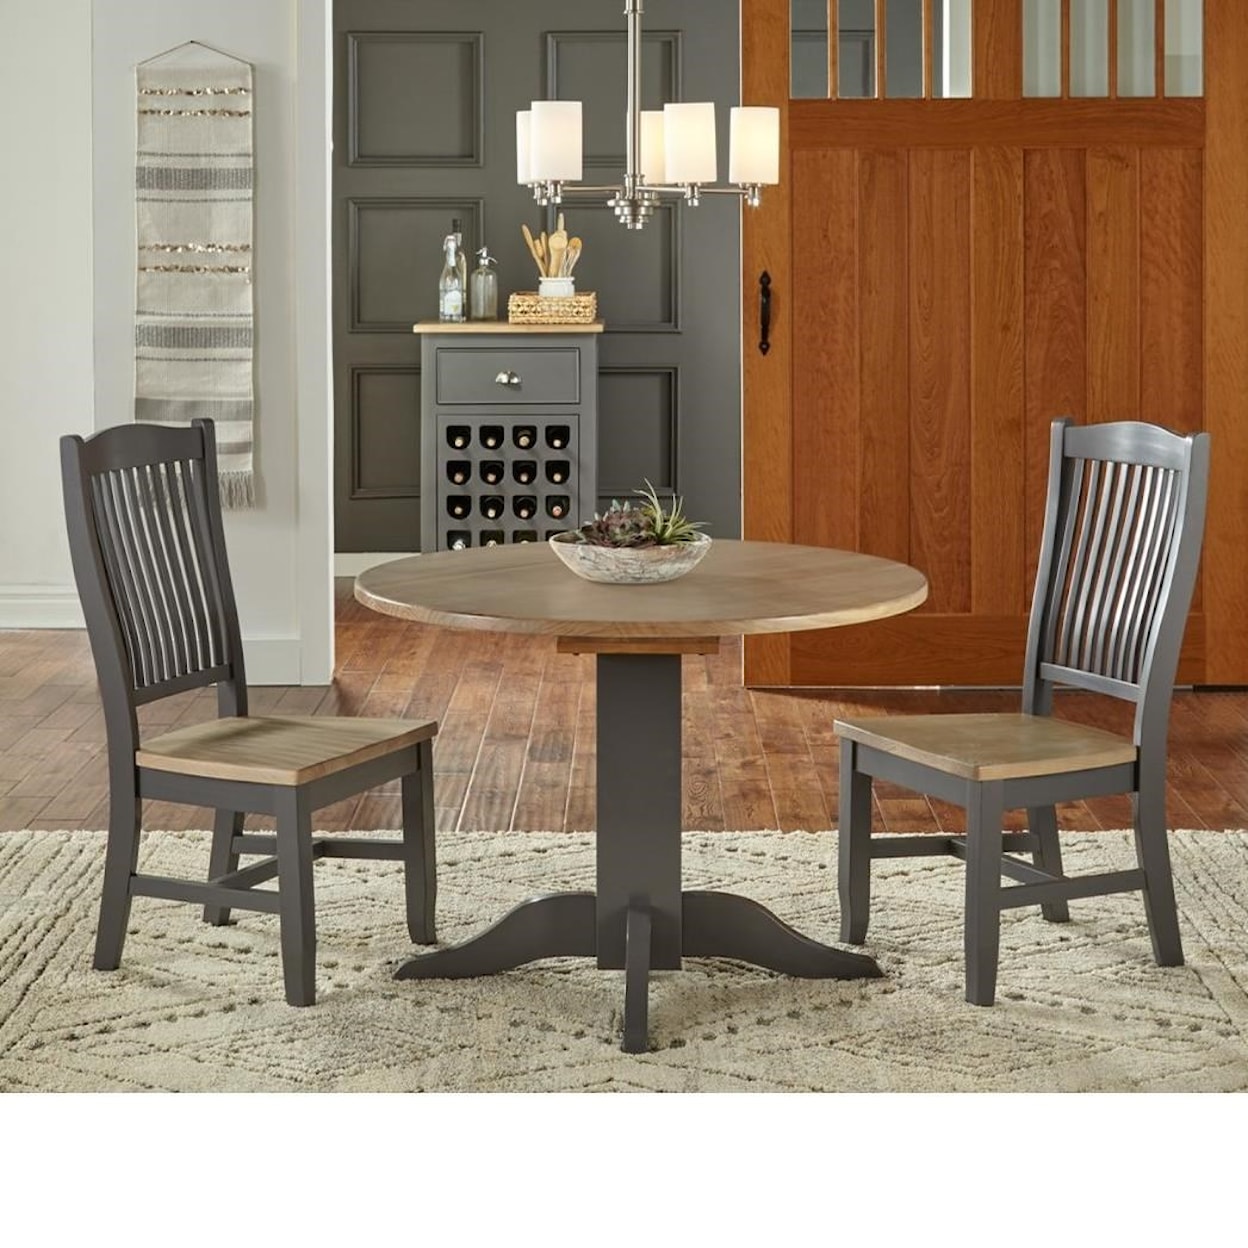 AAmerica Port Townsend 3 Pc Table Set